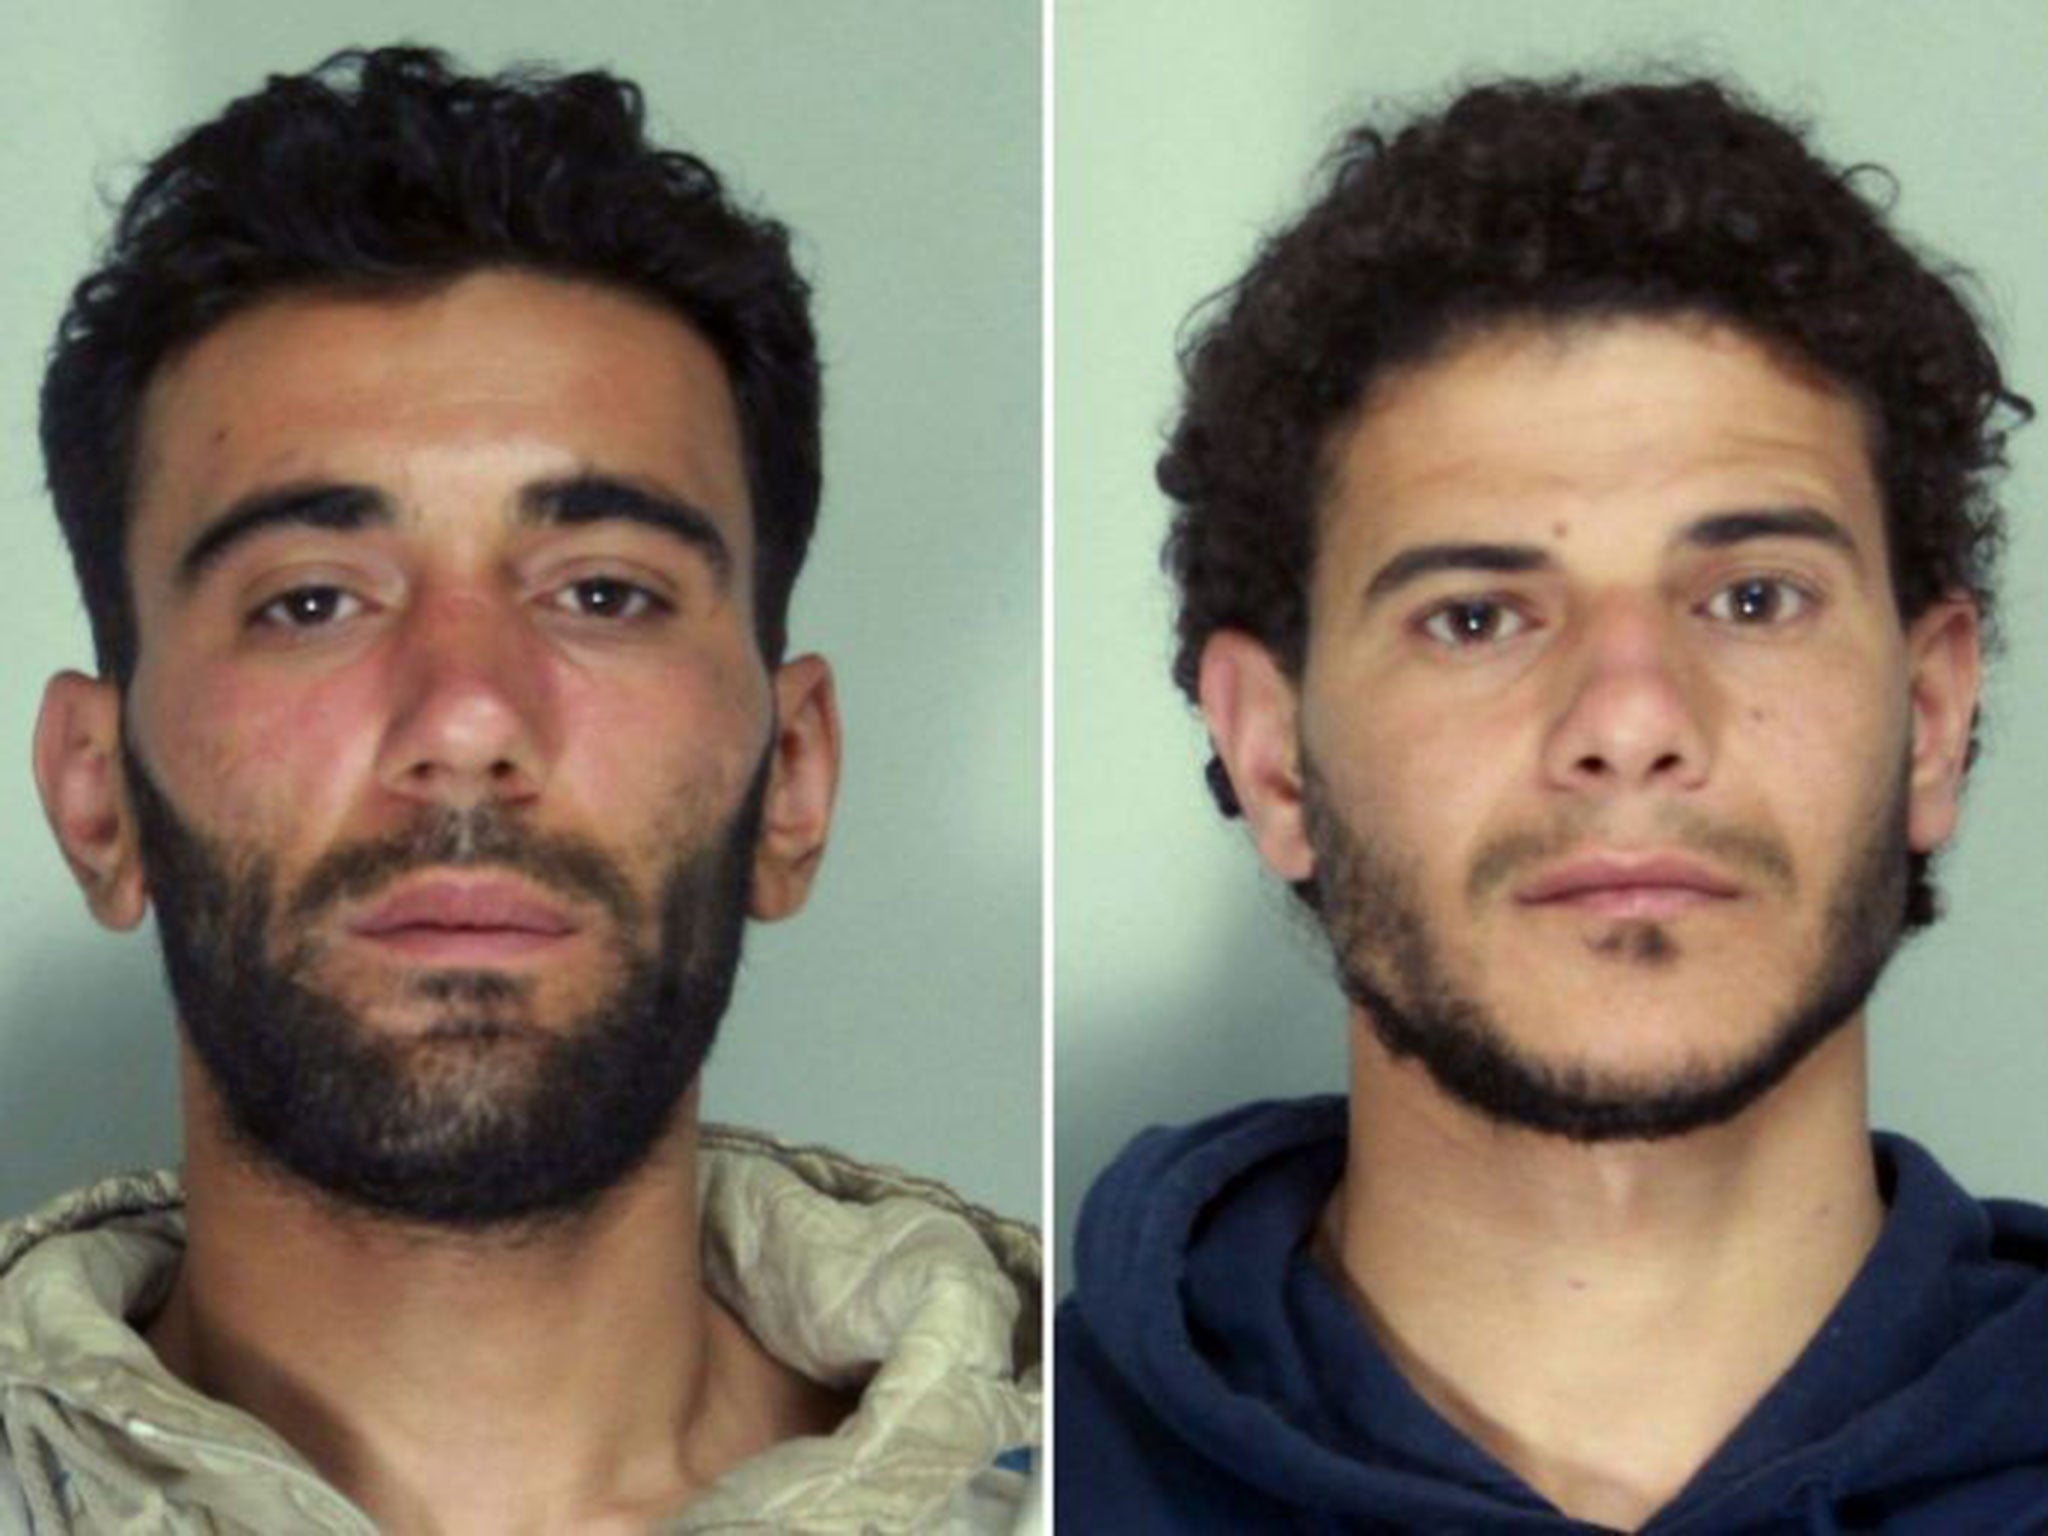 Mohammed Ali Malek (L) and Mahmud Bikhit who have been arrested on suspicion of being respectively captain and crew member of the migrant ship that capsized off the Libyan coast